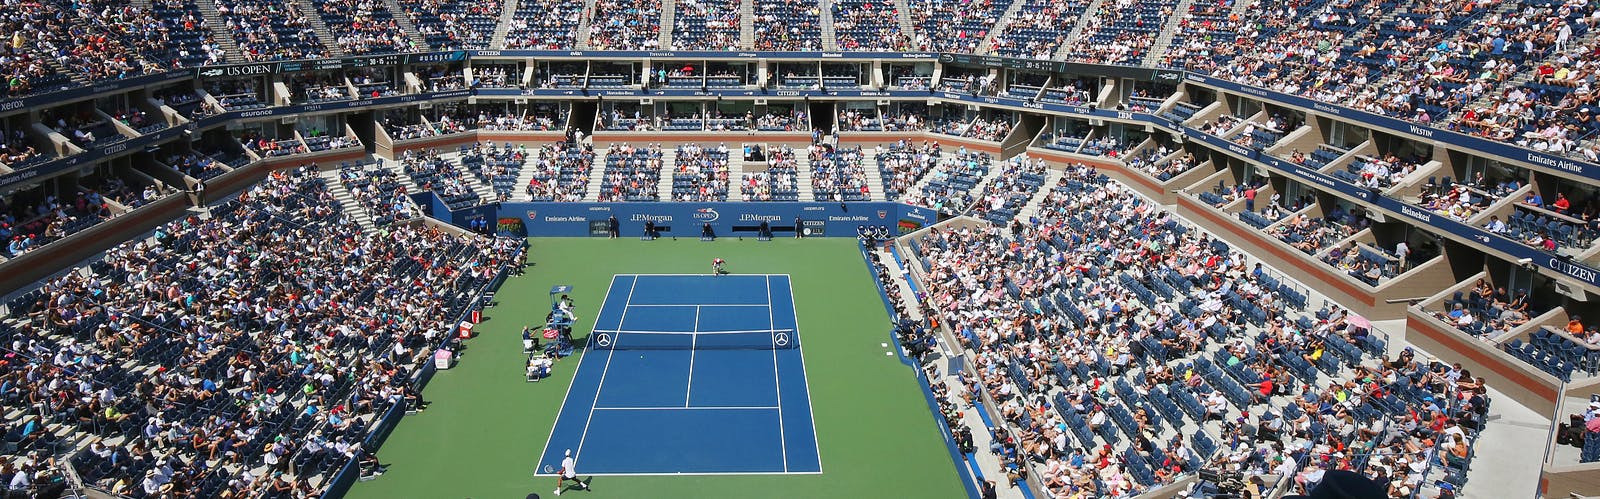 Arthur Ashe Stadium during the day, filled with fans watching a men's singles match.